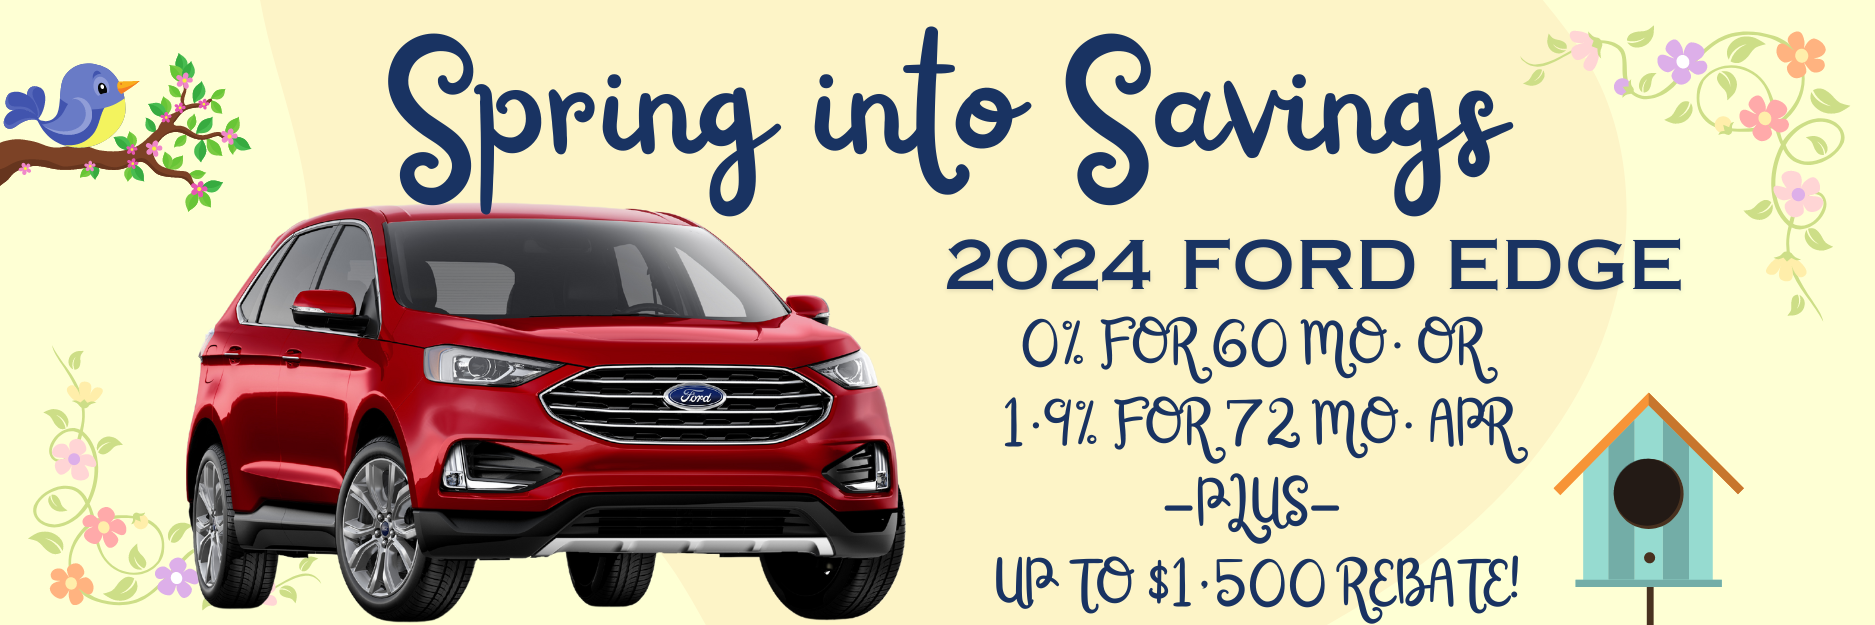 Spring into savings 2024 Ford Edge 0% for 60 mo. or 1.9%